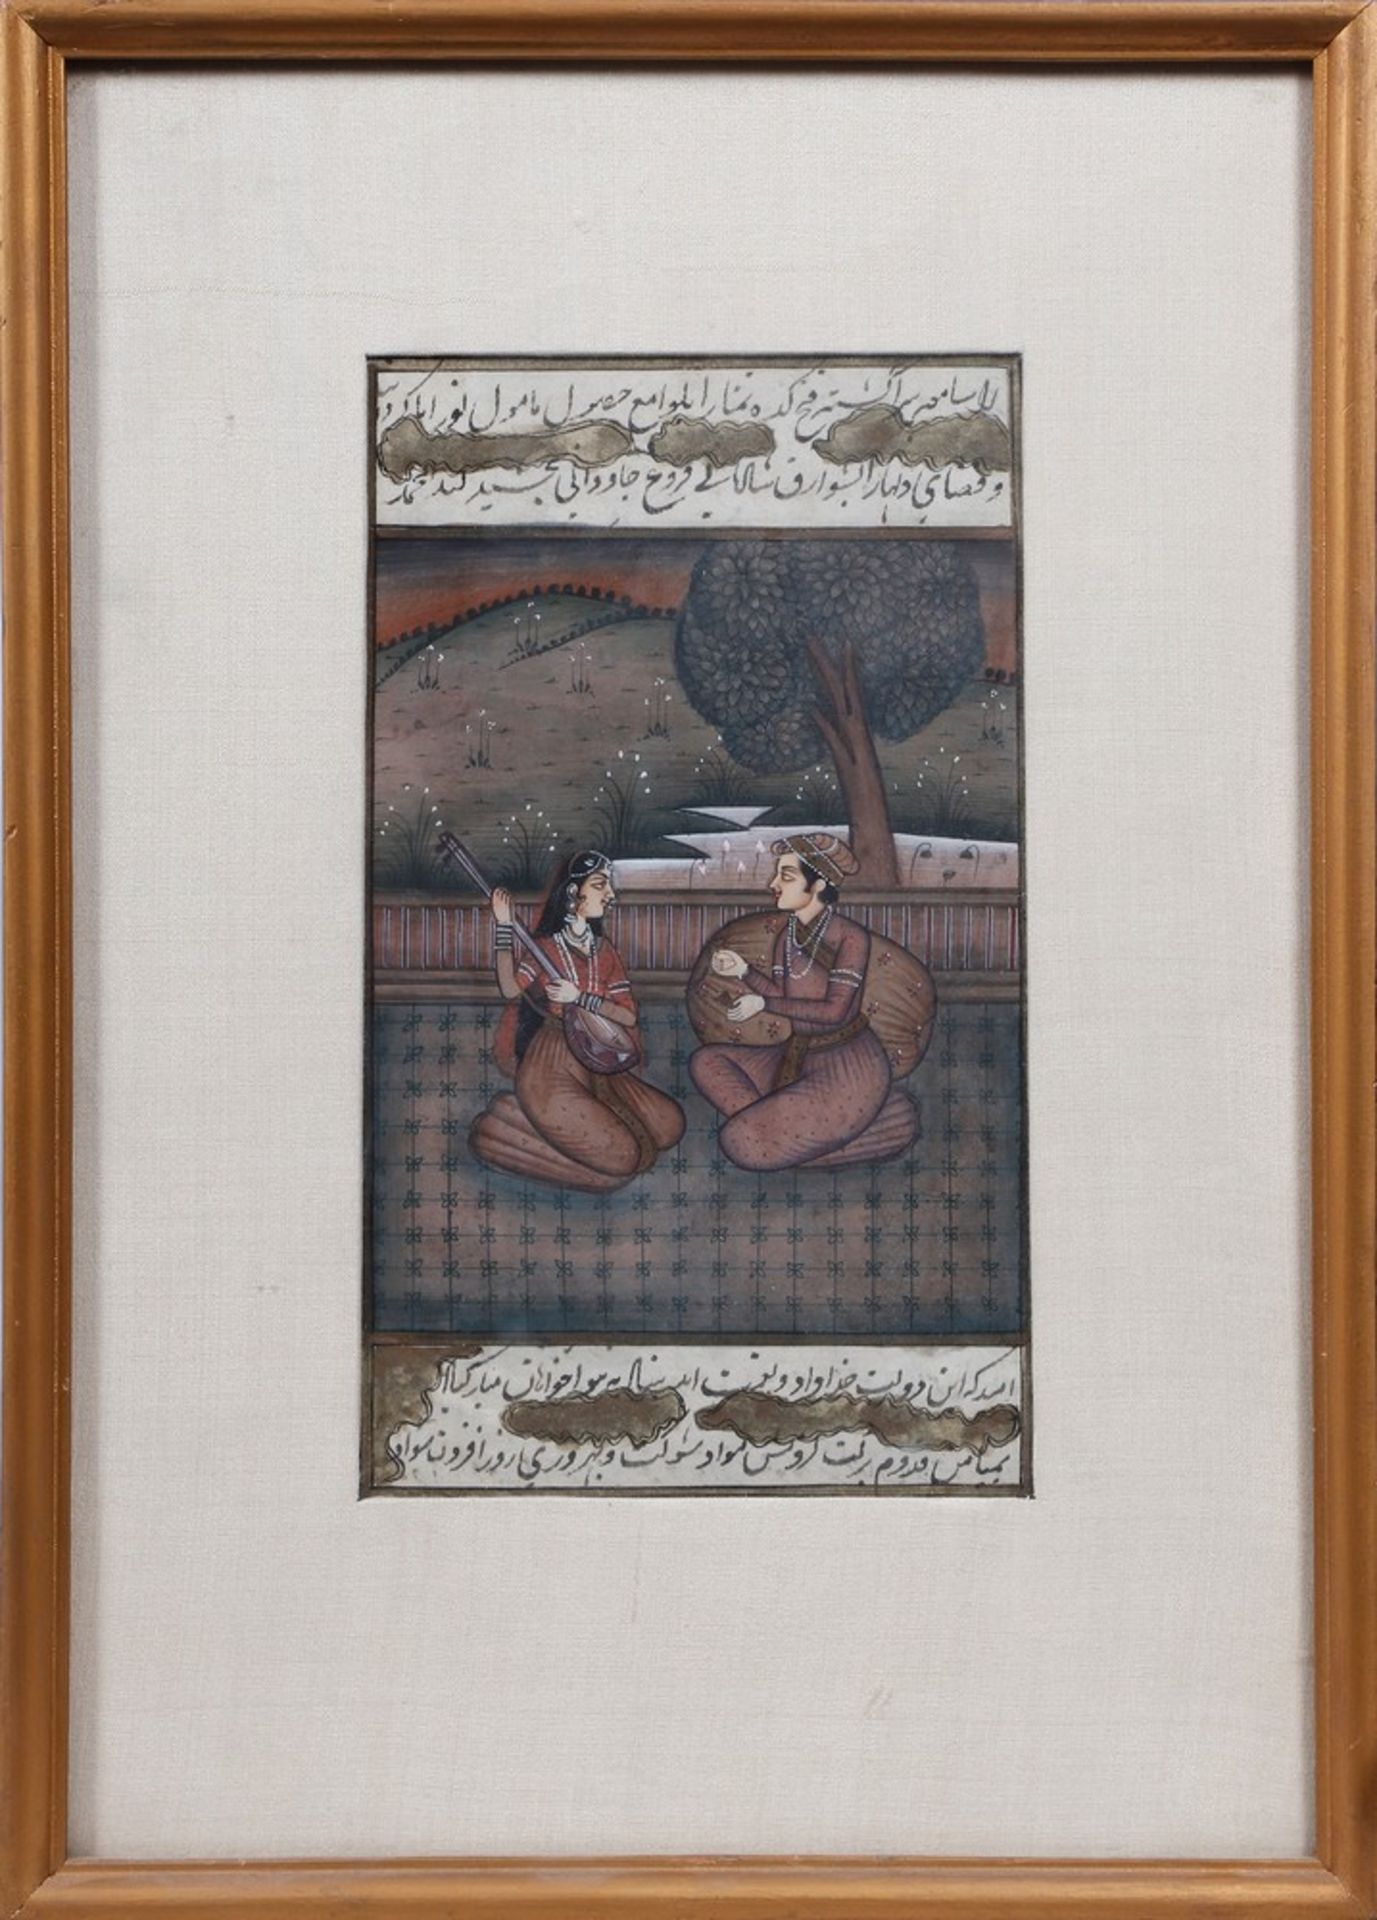 Miniature painting, India, probably 19th century